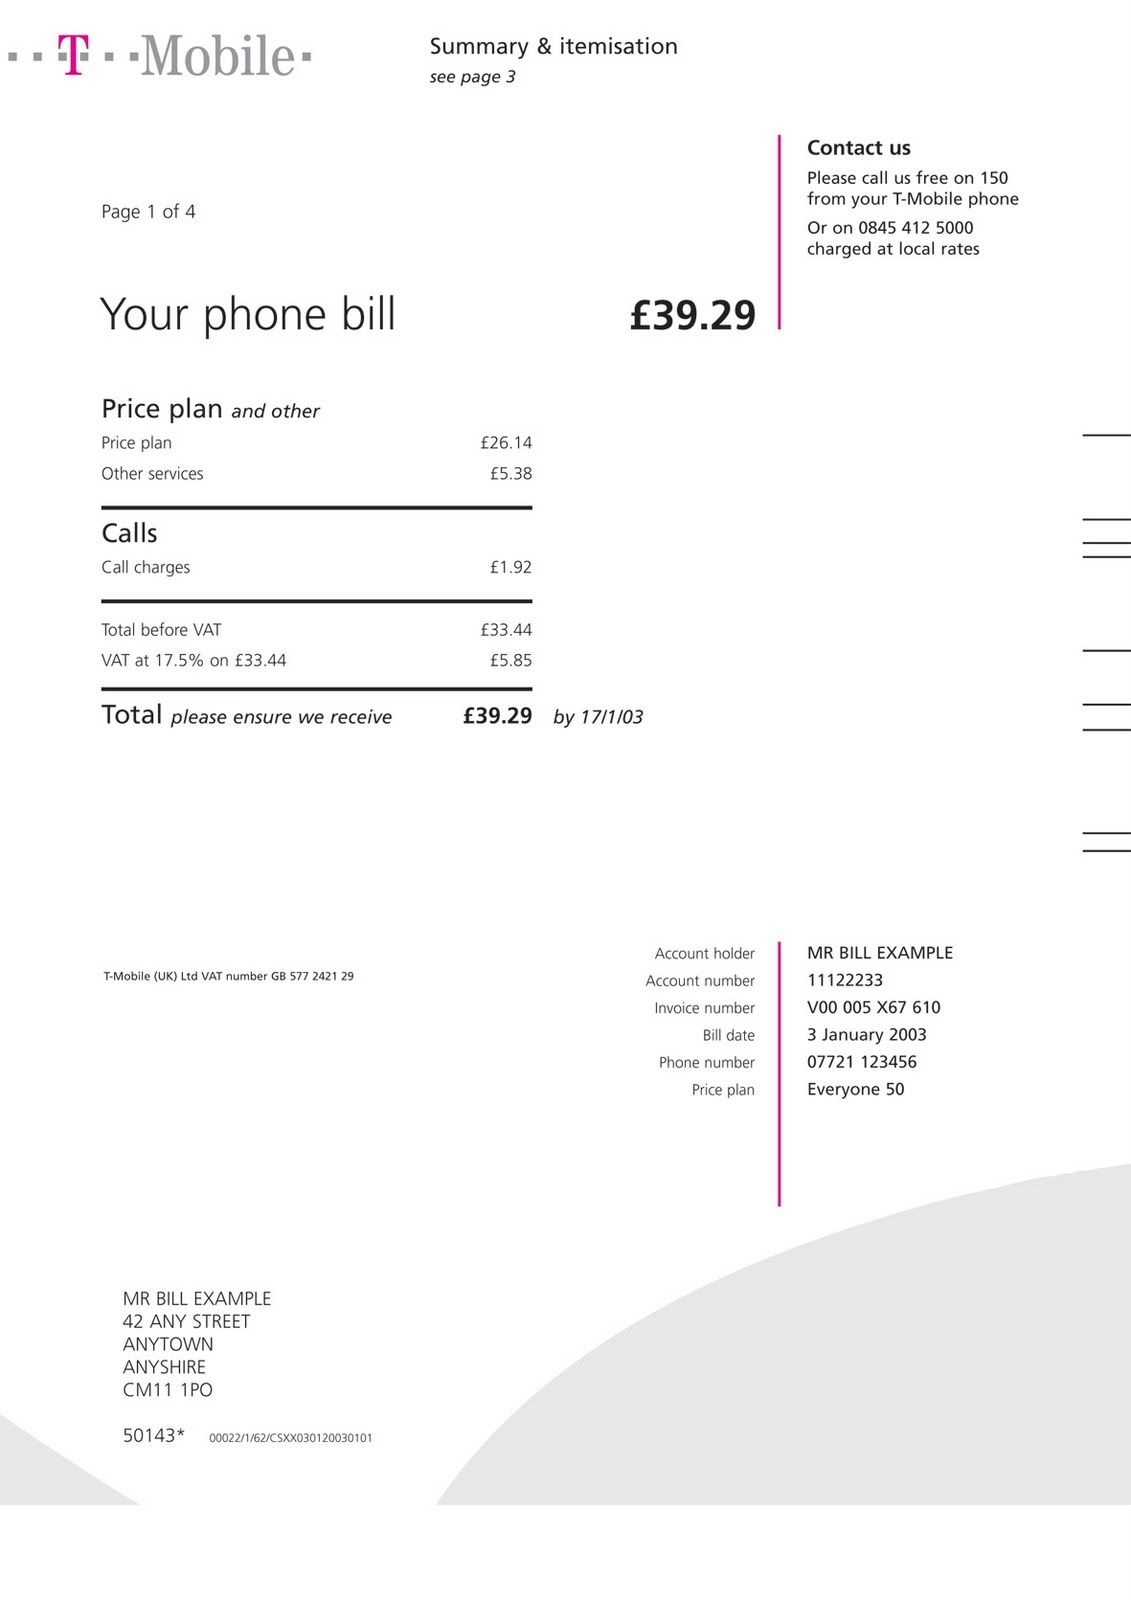 Invoice Of Mobile Phones